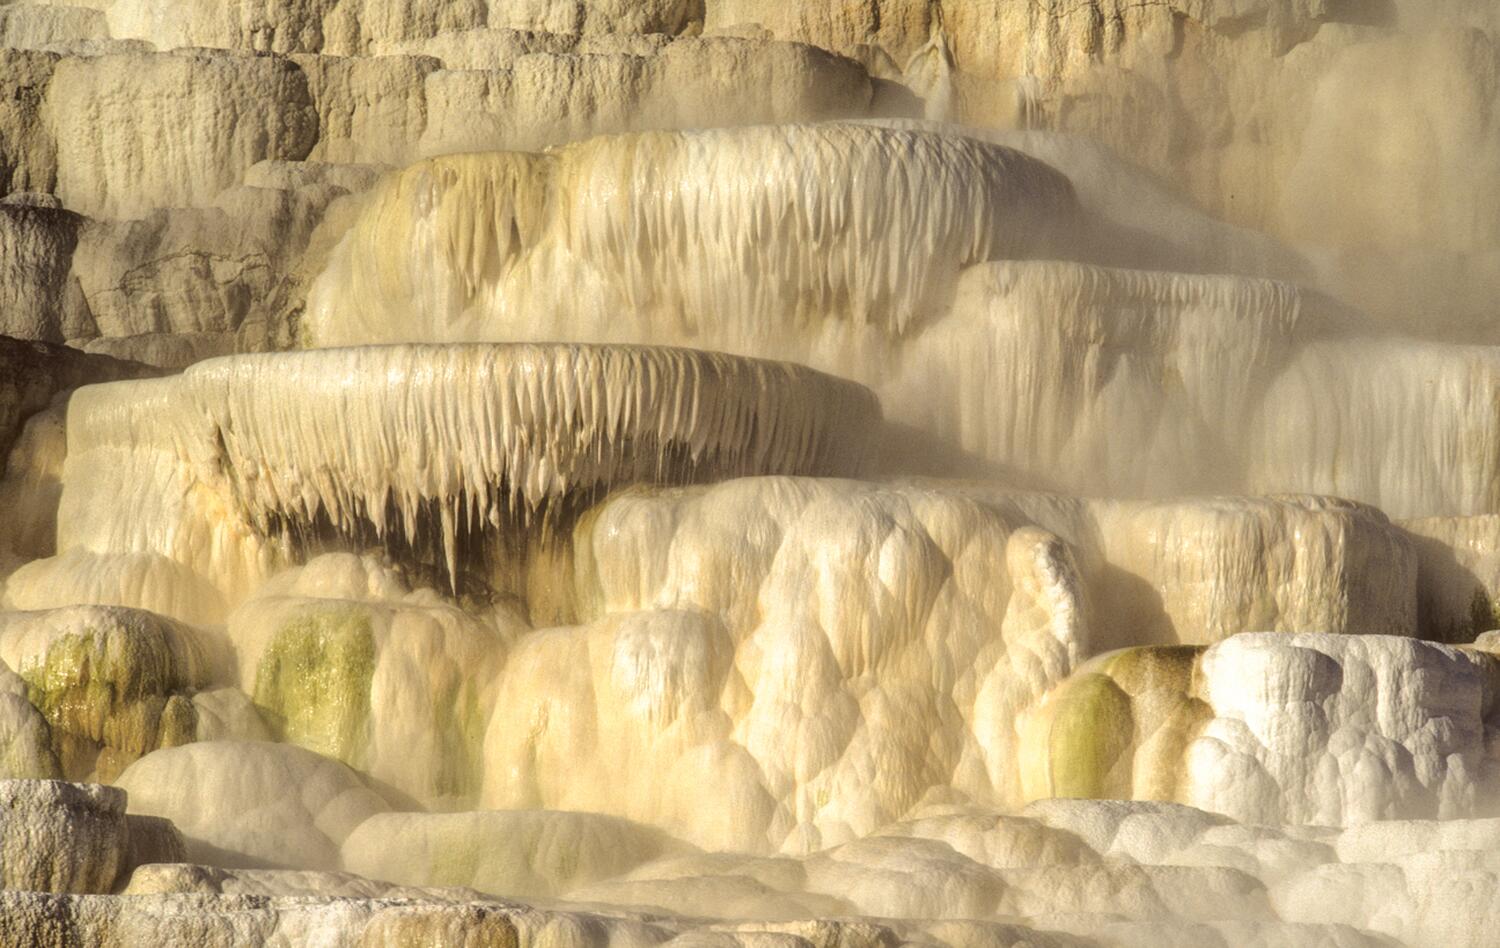 The mineral travertine deposited at Mammoth Hot Springs in Yellowstone National Park